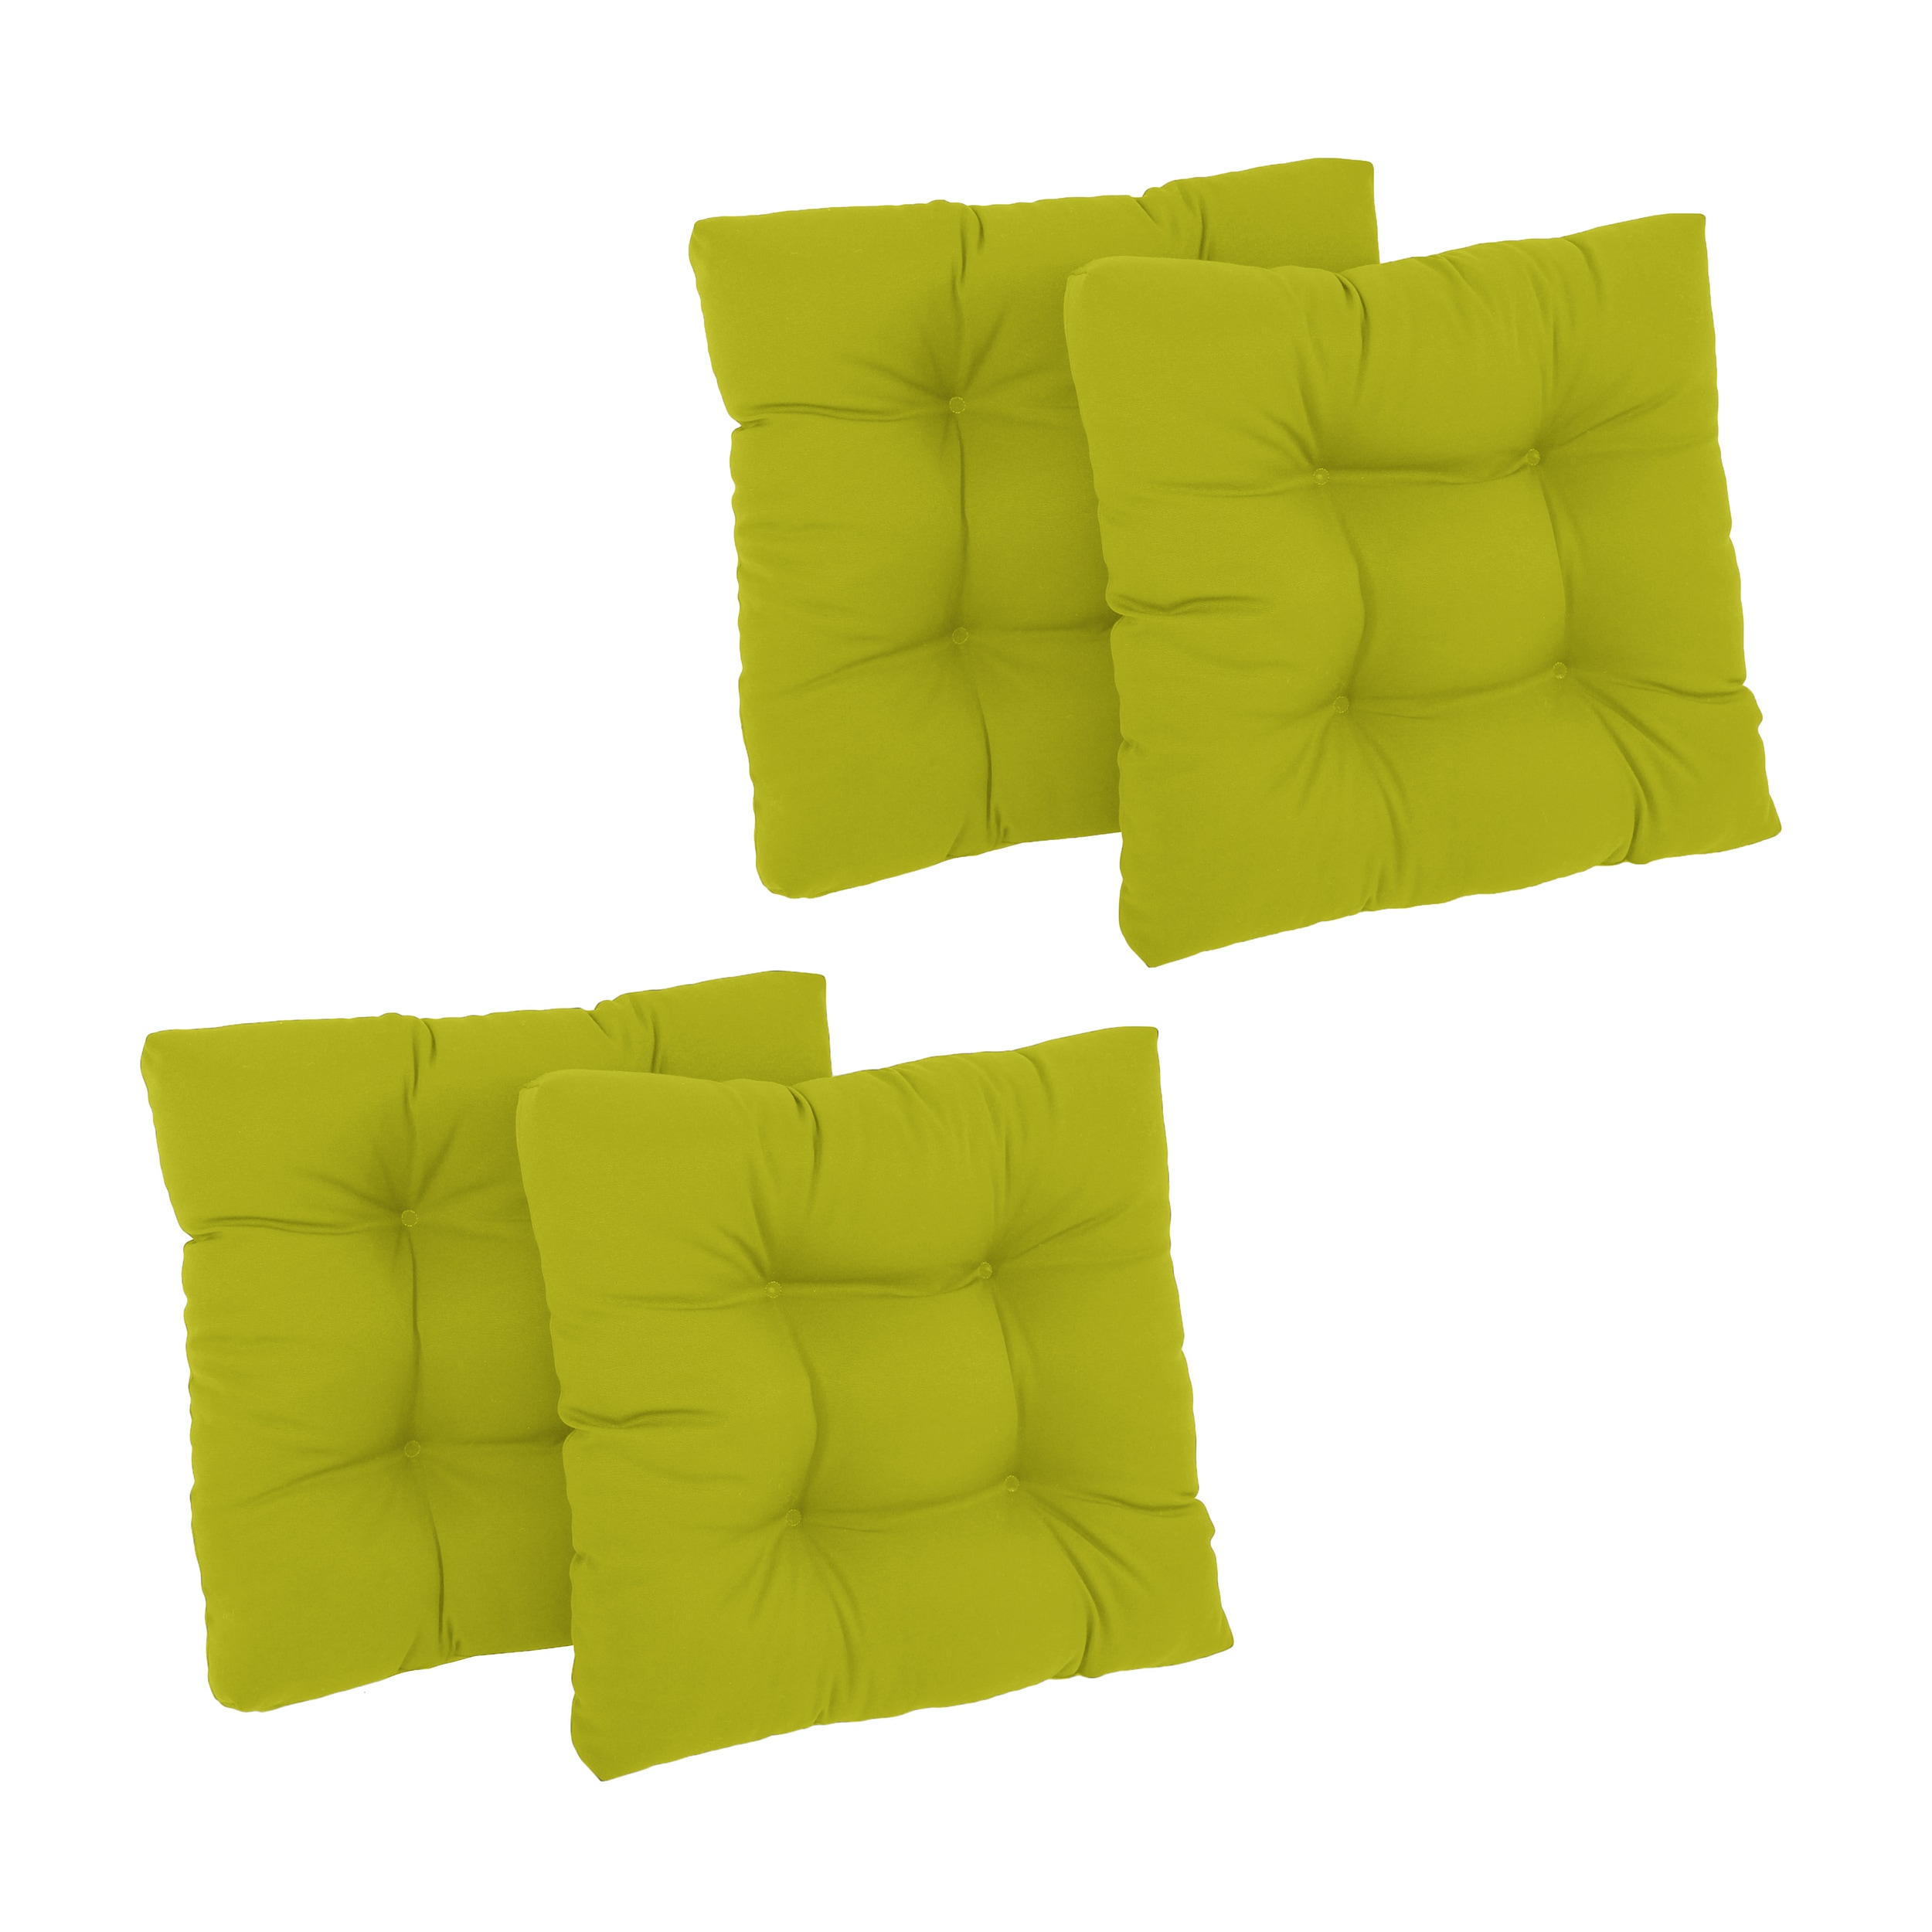 Pressure Reducing Chair Cushion Hunter Green for sale online